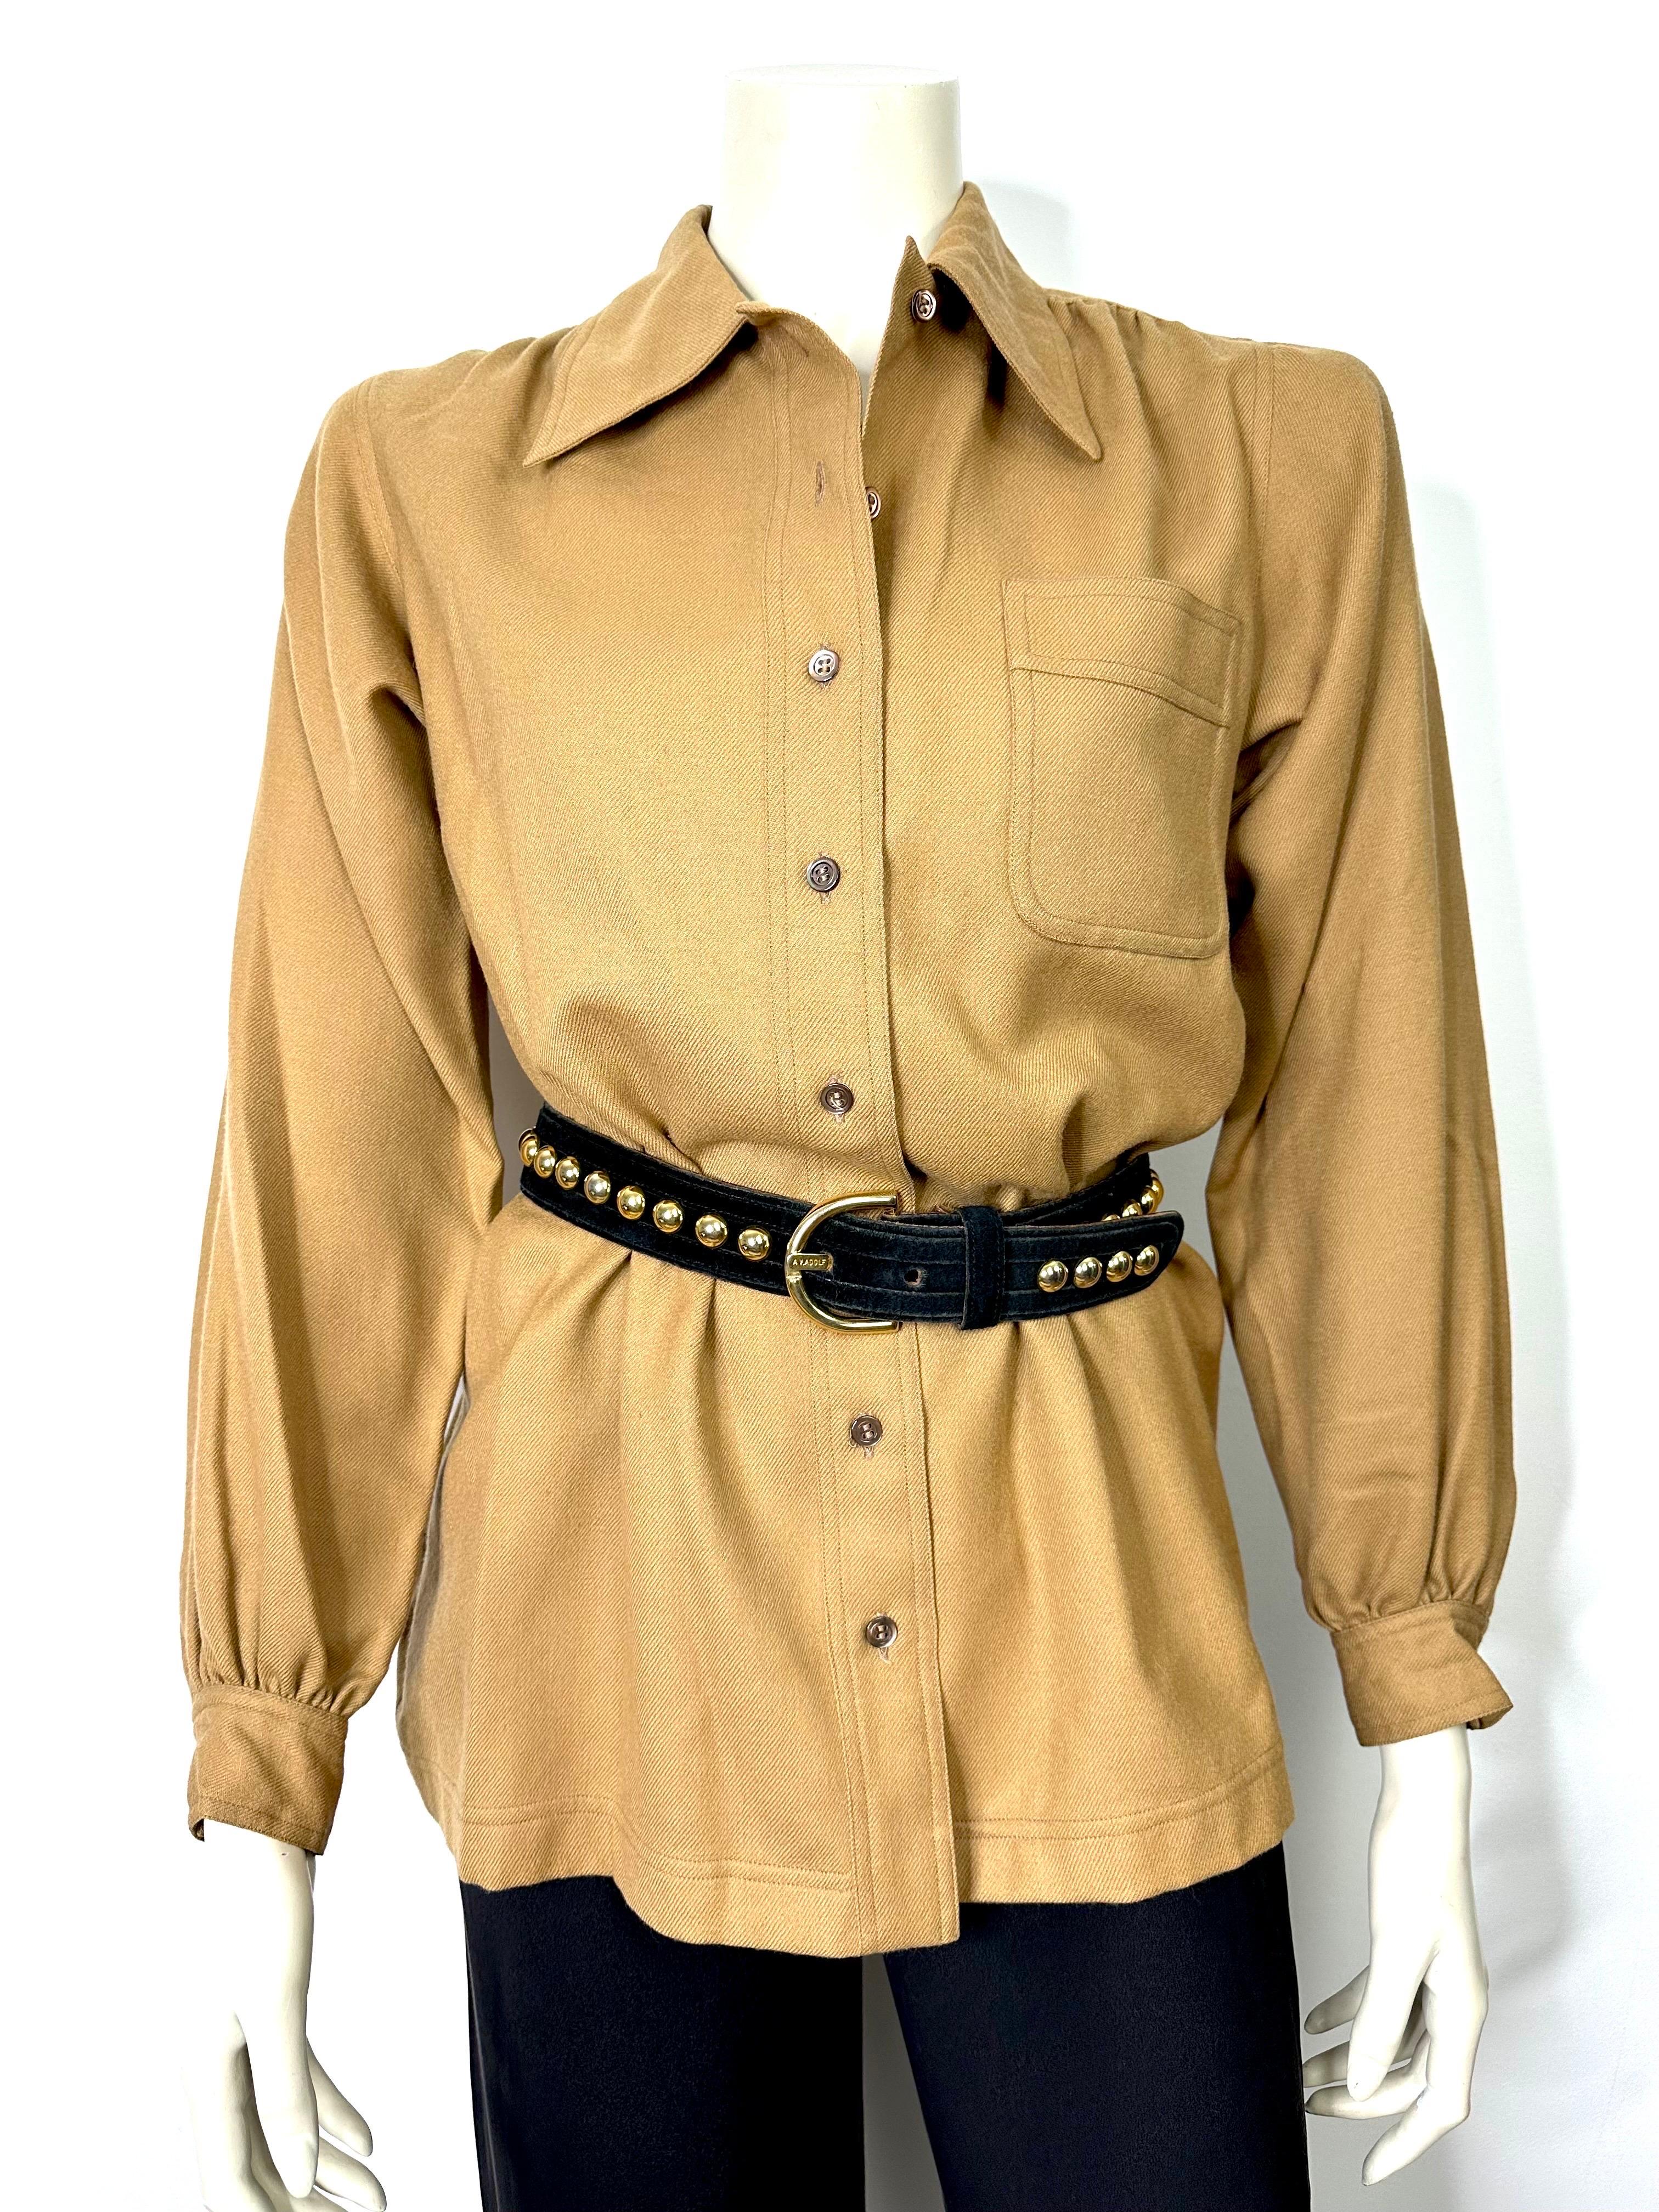 Yves saint Laurent Rive gauche 1970s safari-style shirt in brown wool, unlined, with button fastenings at front and cuffs.
One patch pocket on chest.
Pleated shoulders and back.
Attractive pointed collar.
Size 40, please refer to